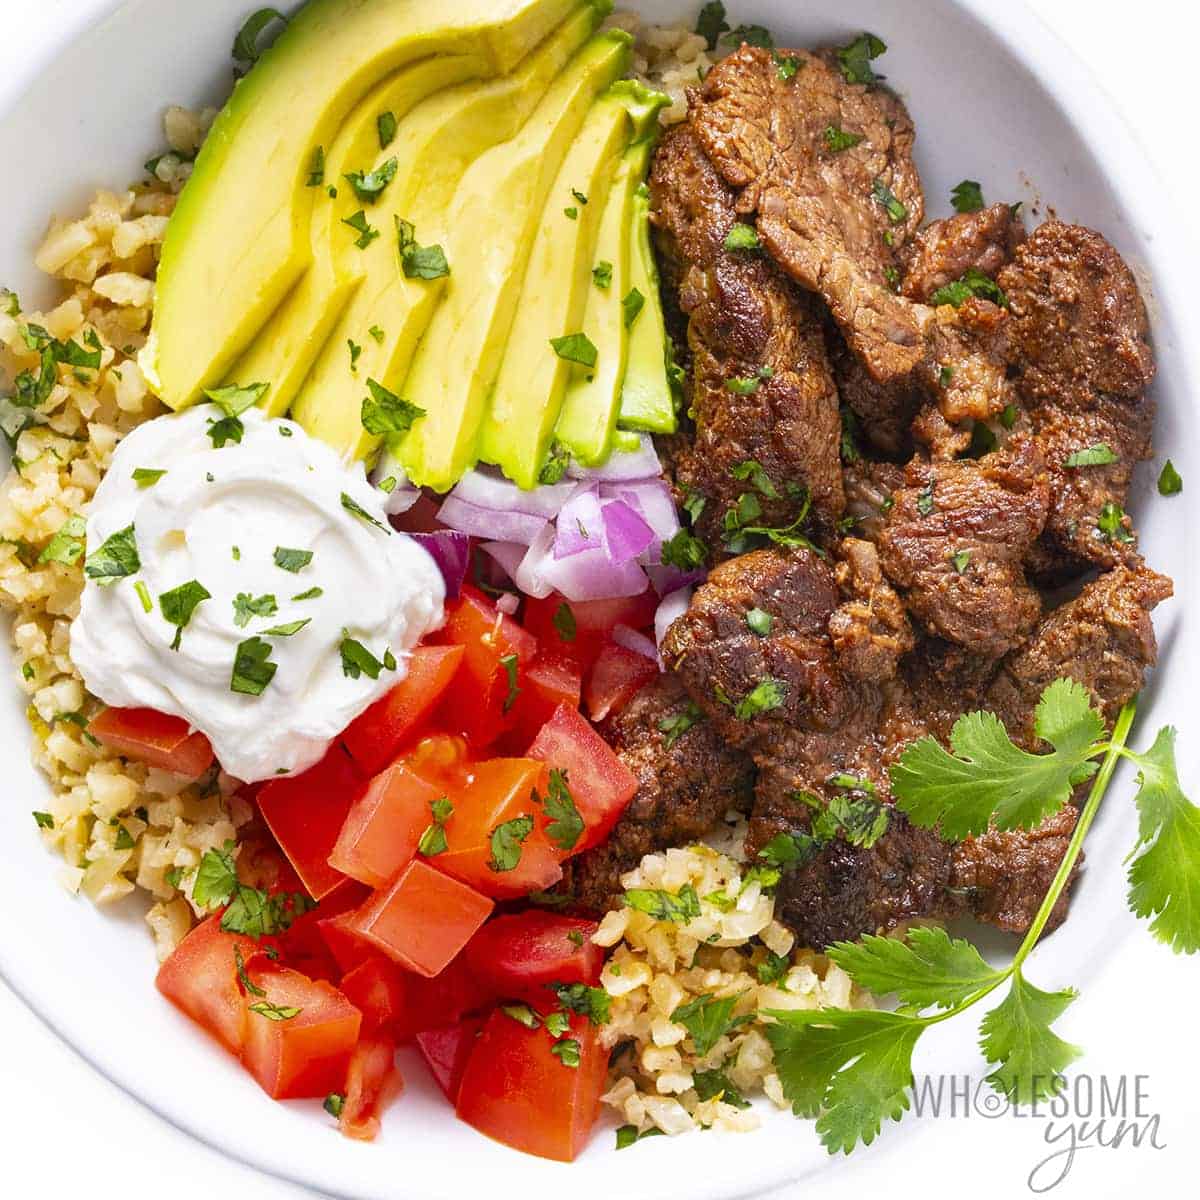 Plated keto burrito bowl with garnishes